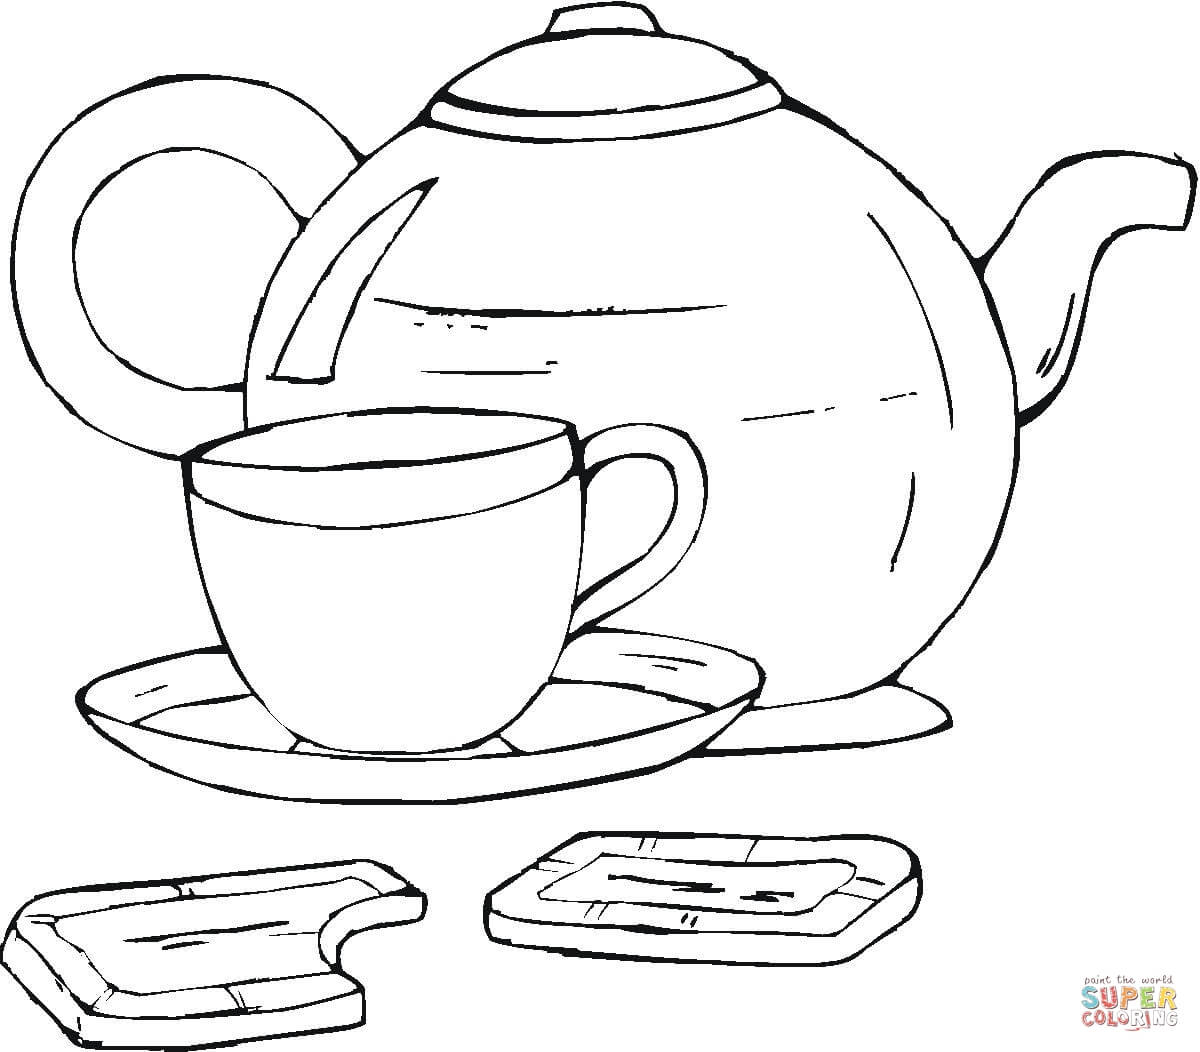 Teacup Coloring Pages To Print Tea Cup Coloring Page Free Printable Coloring Pages